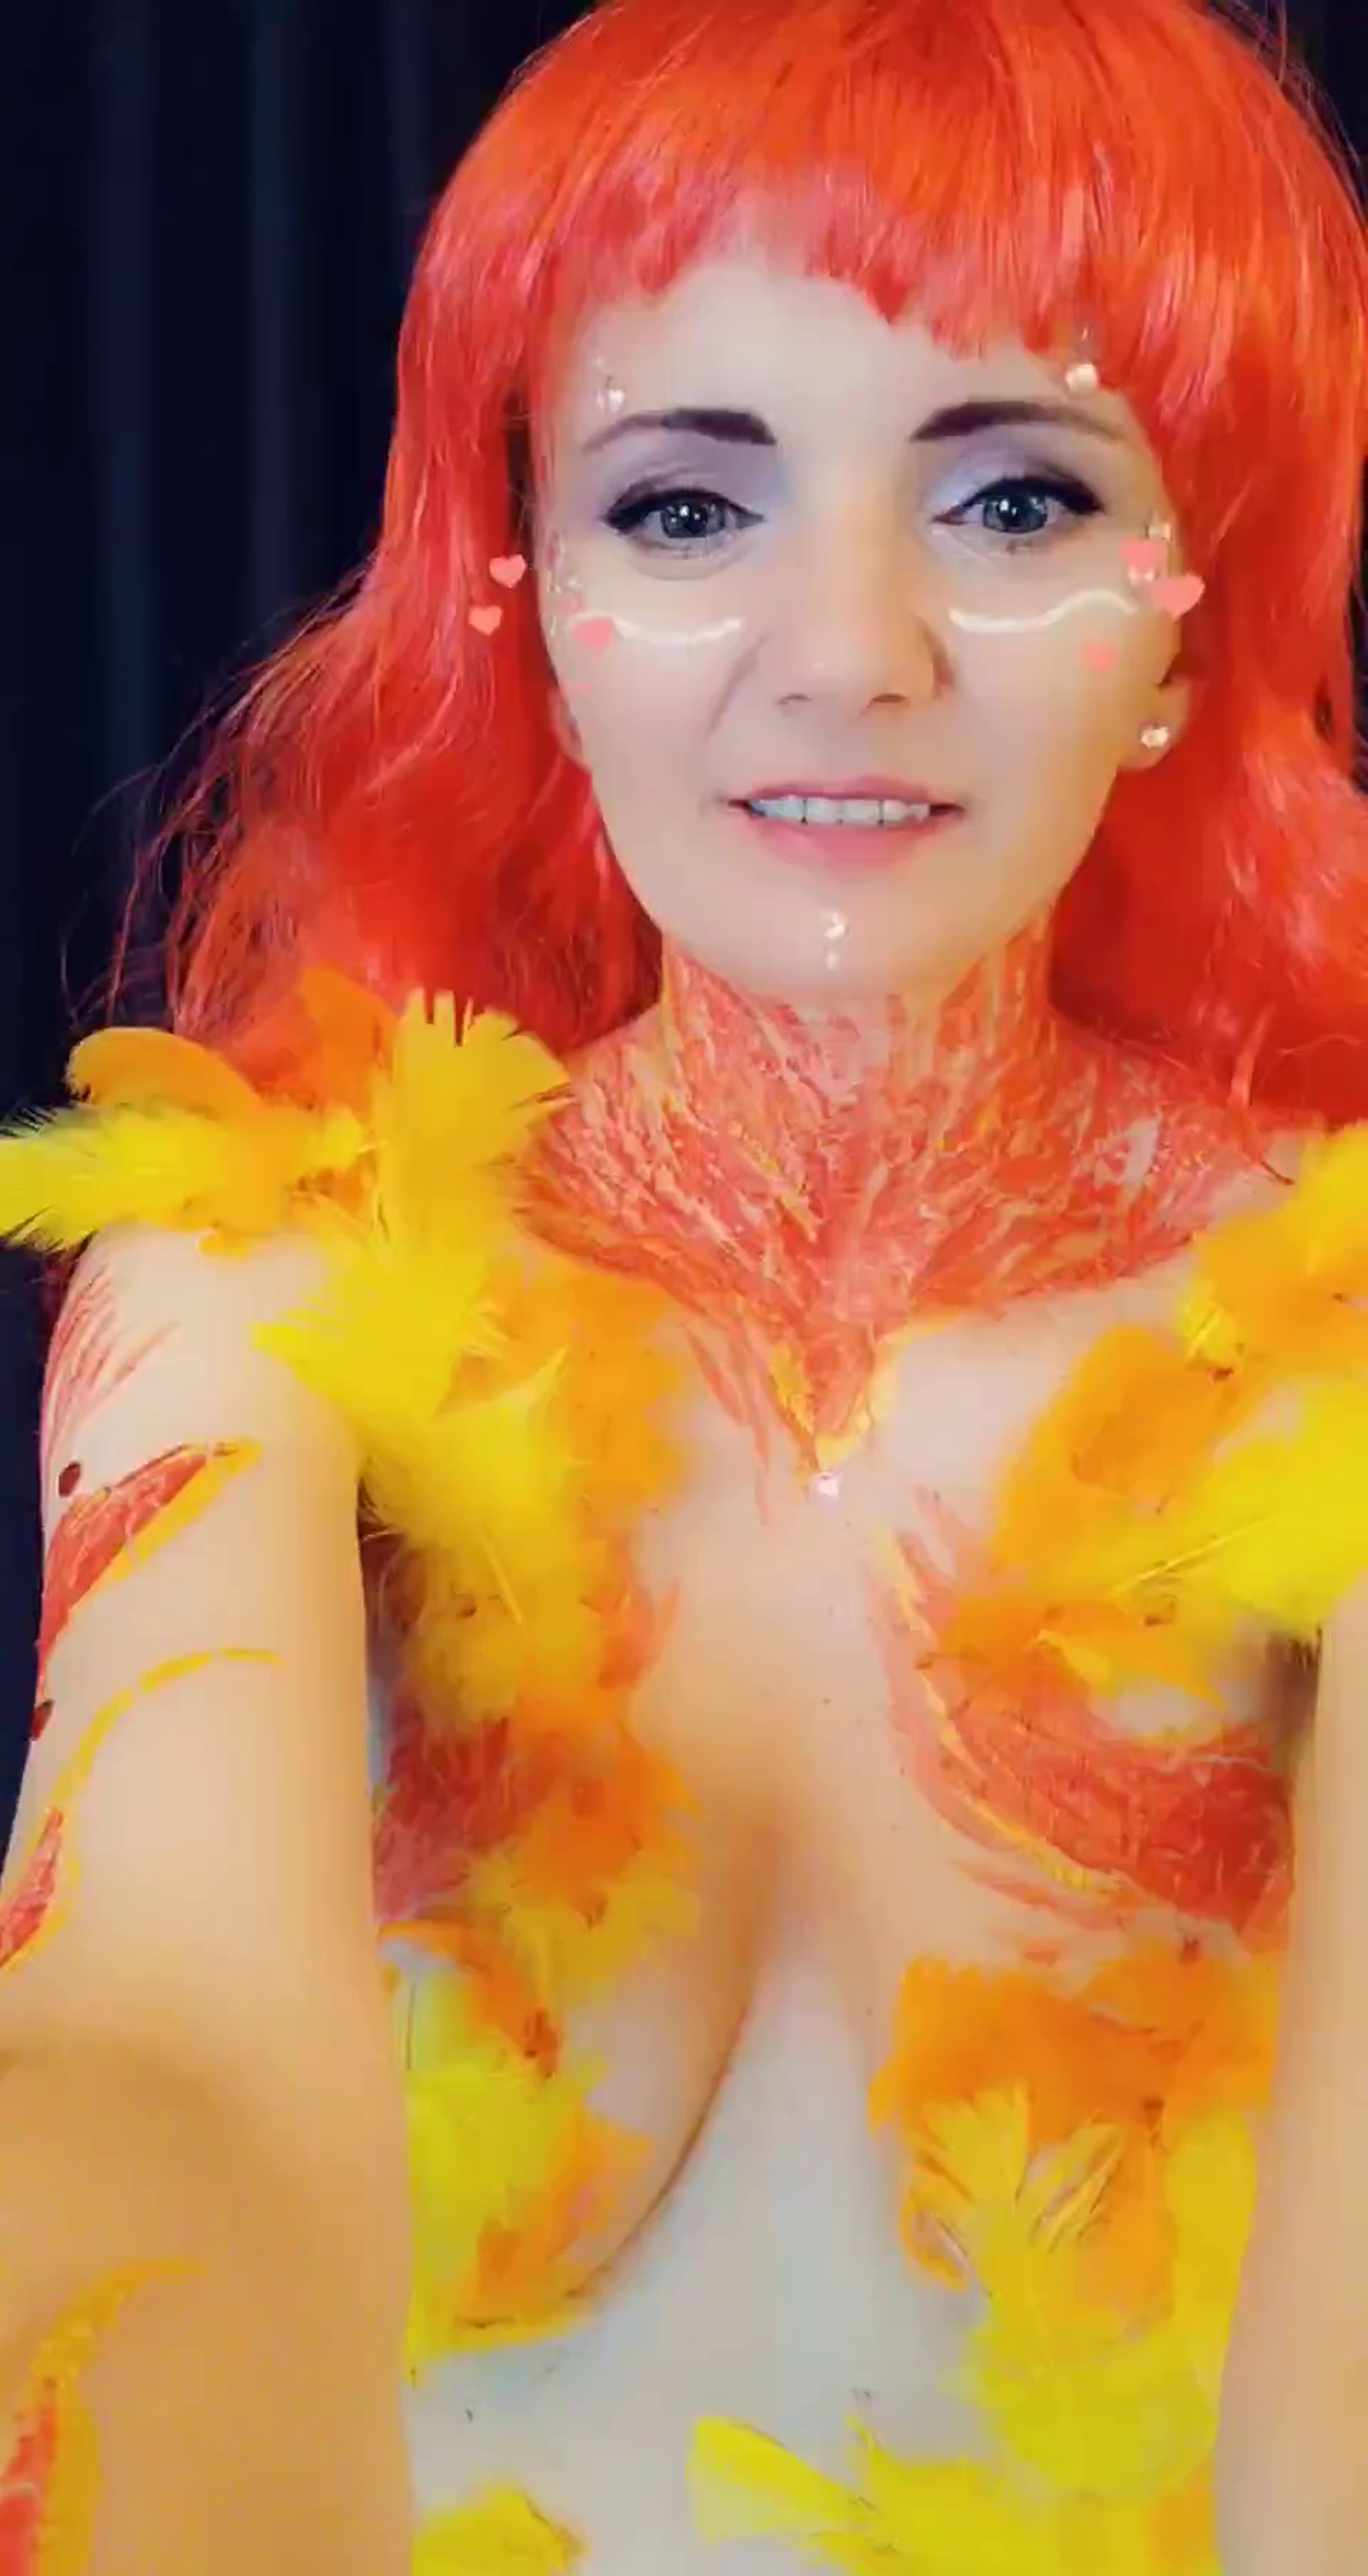 Video by LadyD'Anna with the username @LadyD-Anna, who is a star user,  October 9, 2019 at 9:28 PM. The post is about the topic Cosplay Madness and the text says 'To explain a bit my links:

Snapchat, really I barelly use it, not a fan of it.
Instagram, posting on and off there.
Patreon, building it up, trying to post weekly.
MFCShare, all my videos and photos are there. Also my place to go Live.
OnlyFans, 523..'